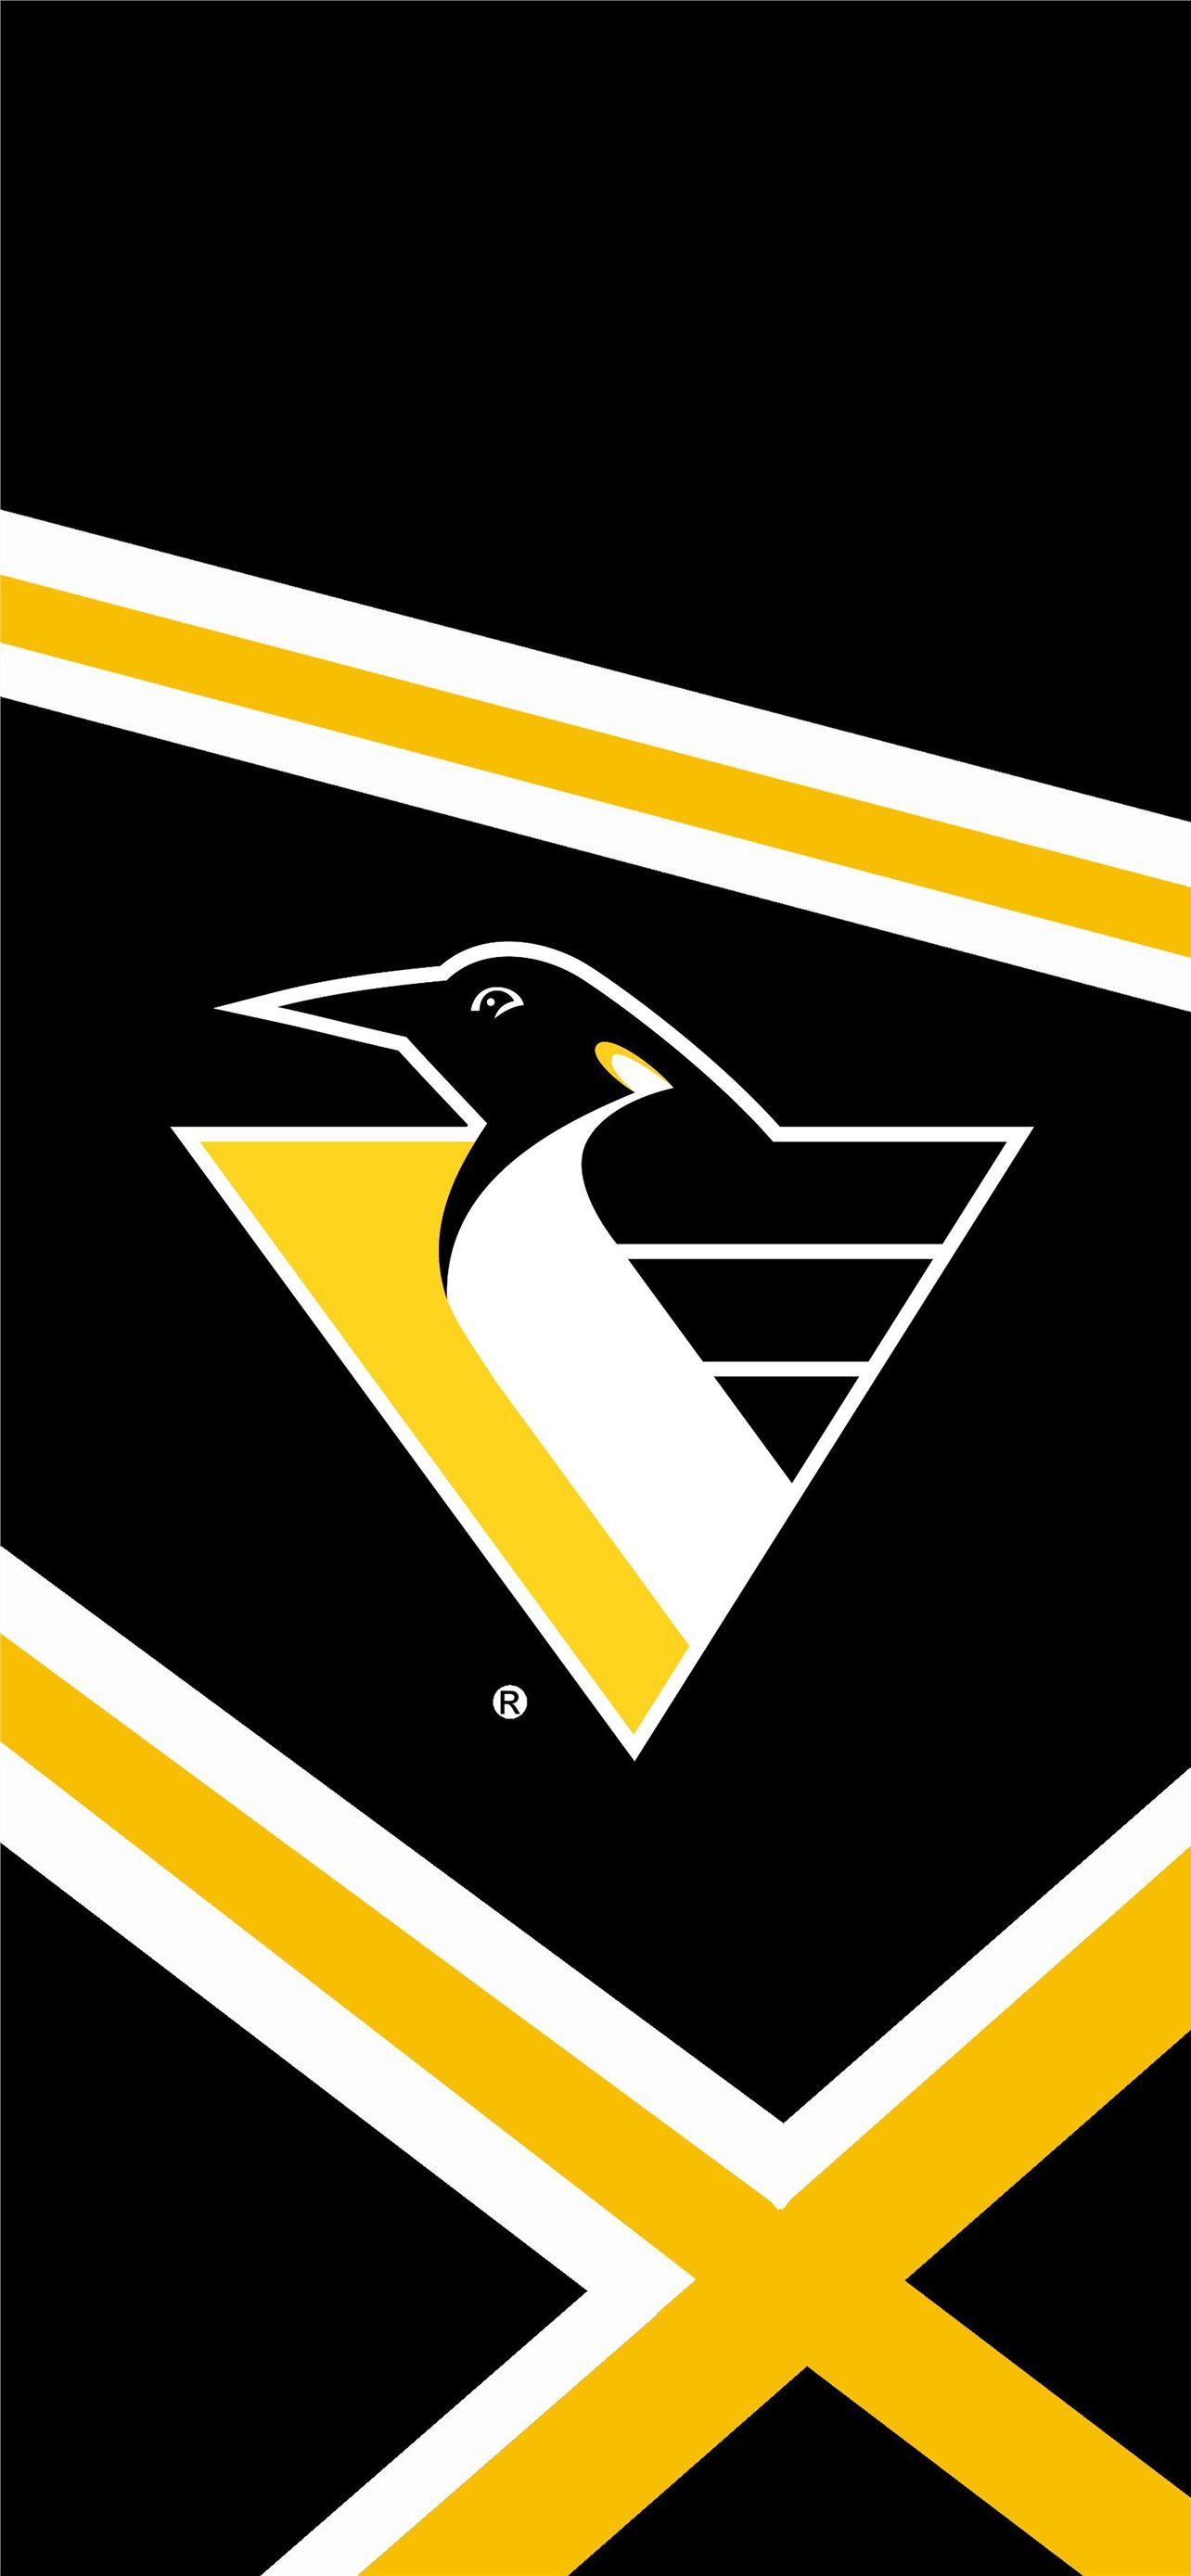 2023 Pittsburgh Penguins wallpaper  Pro Sports Backgrounds